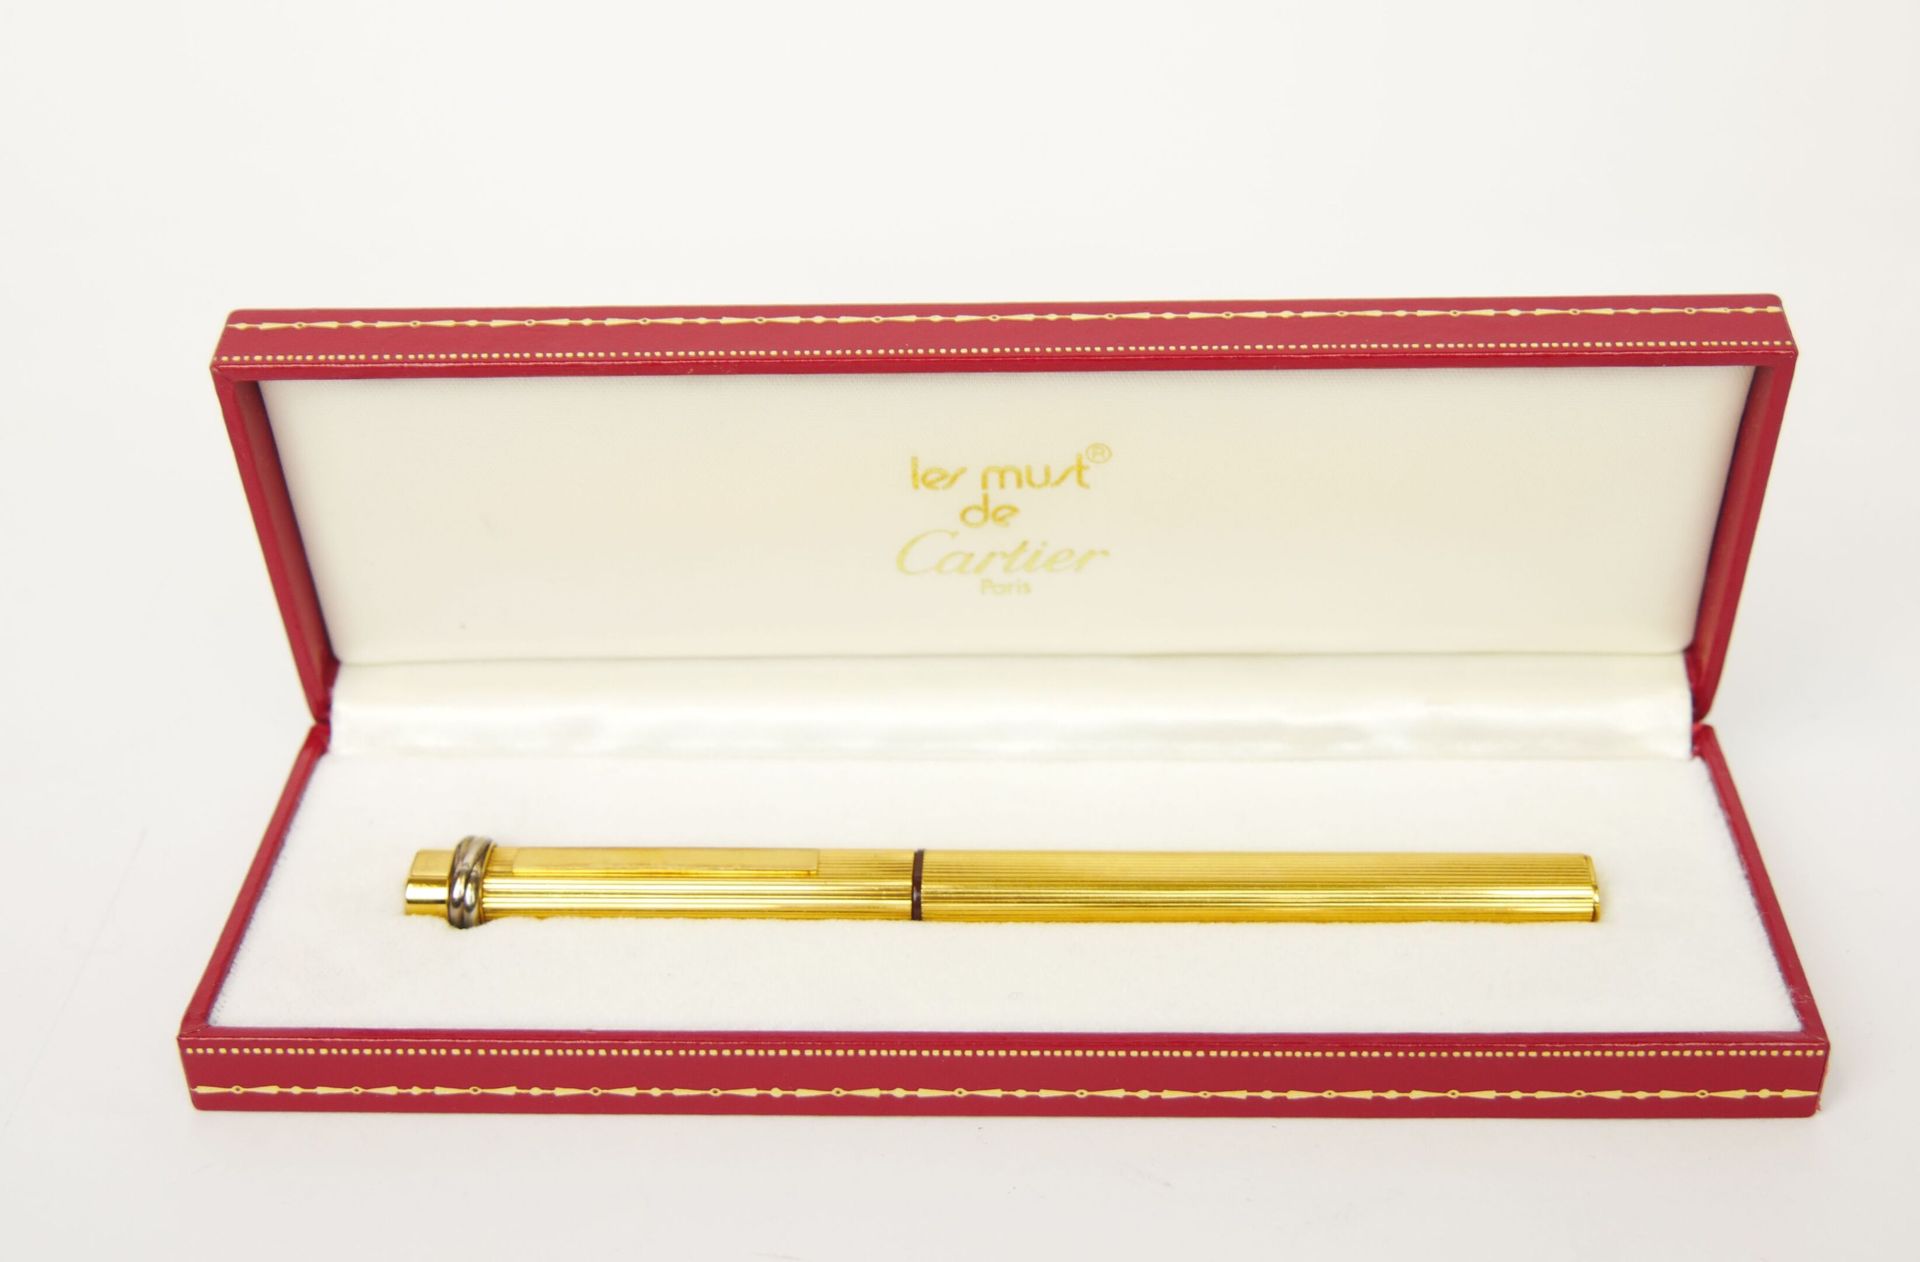 Null CARTIER Paris Made in France

Must de Cartier" gold-plated pen with gold-pl&hellip;